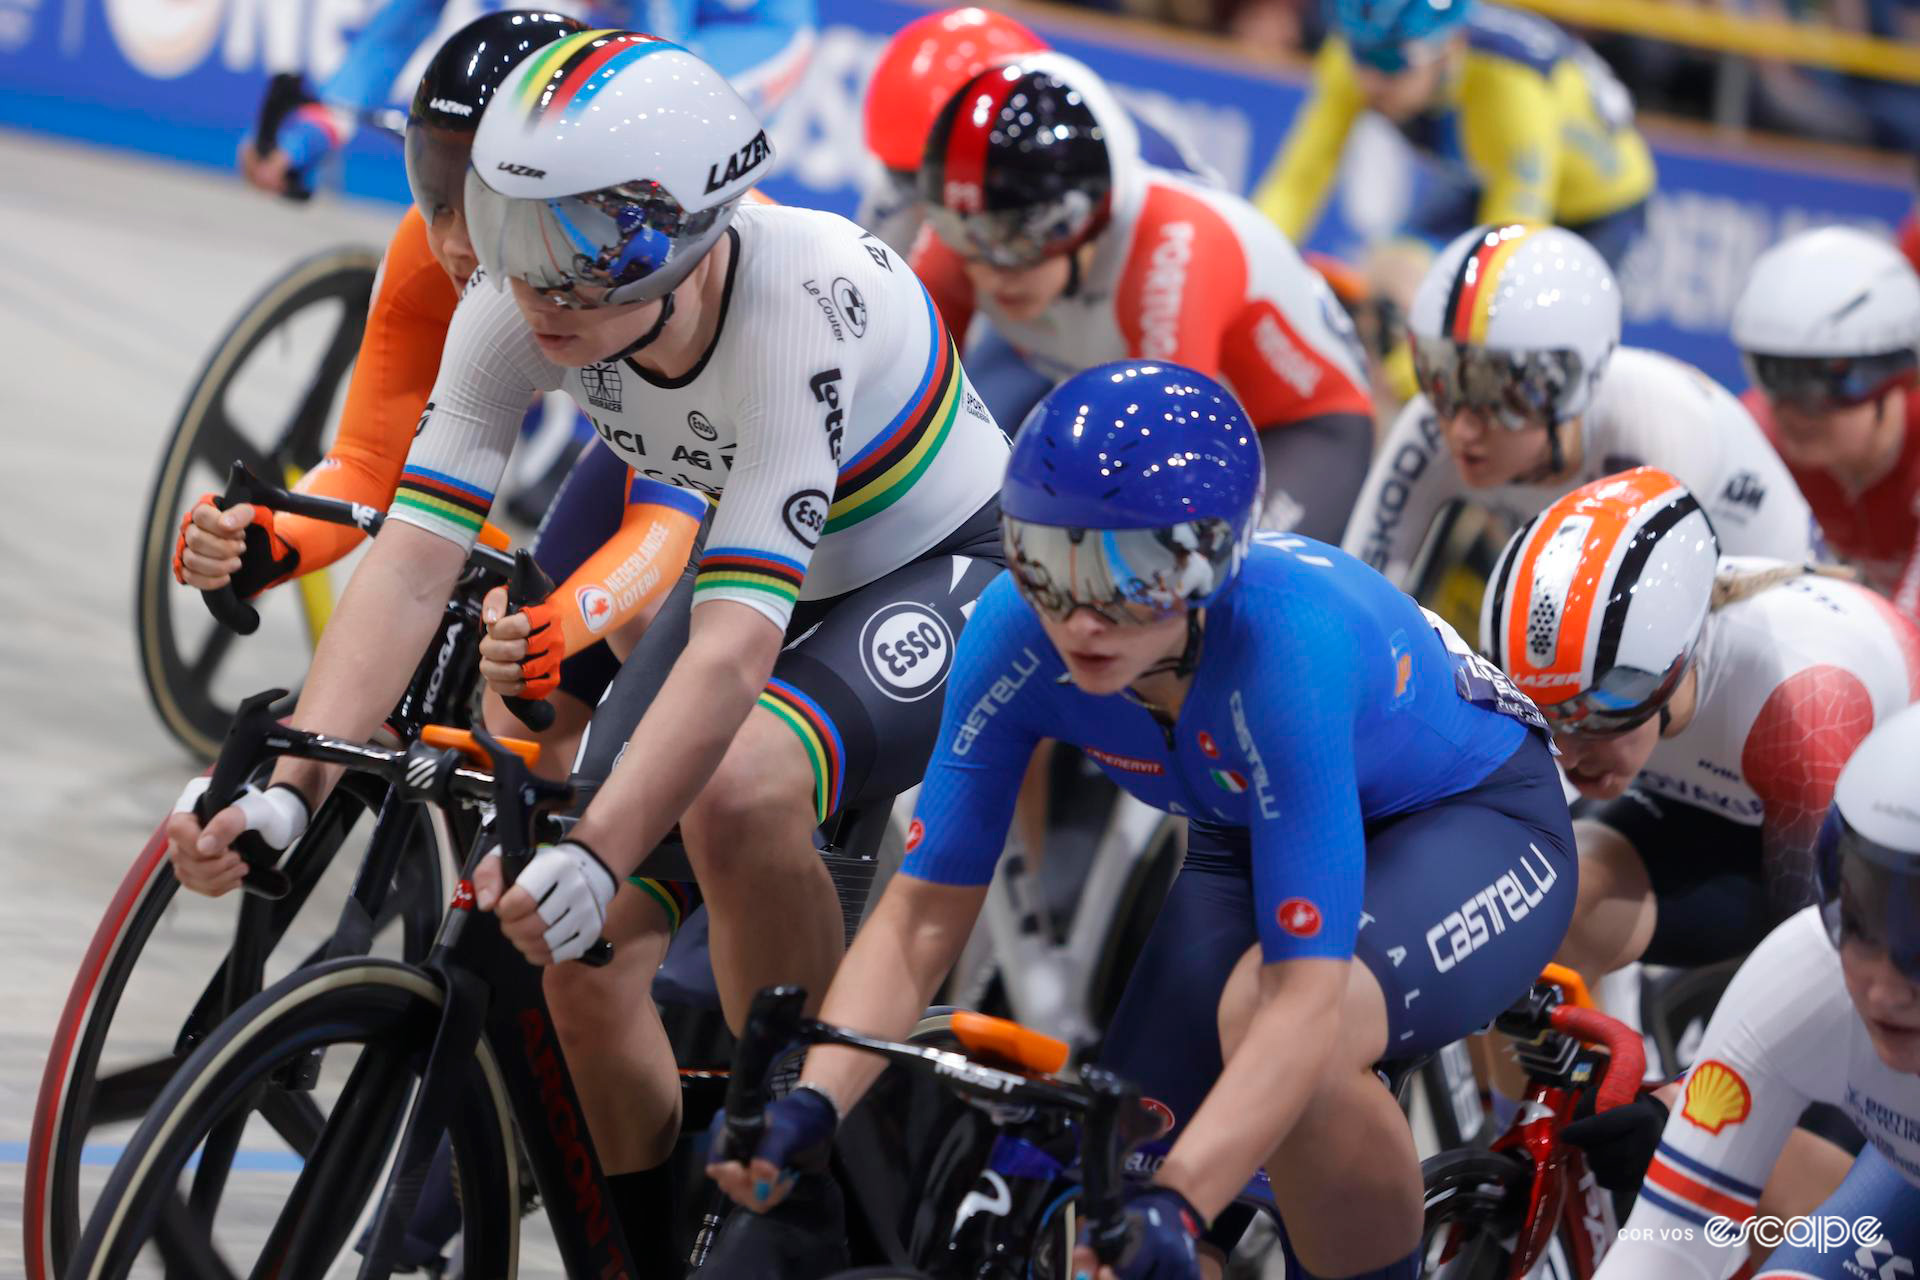 World champion Lotte Kopecky alongside Italy's Chiara Consonni on the front of the pack during the women's elimination final at the 2024 European Track Championships.